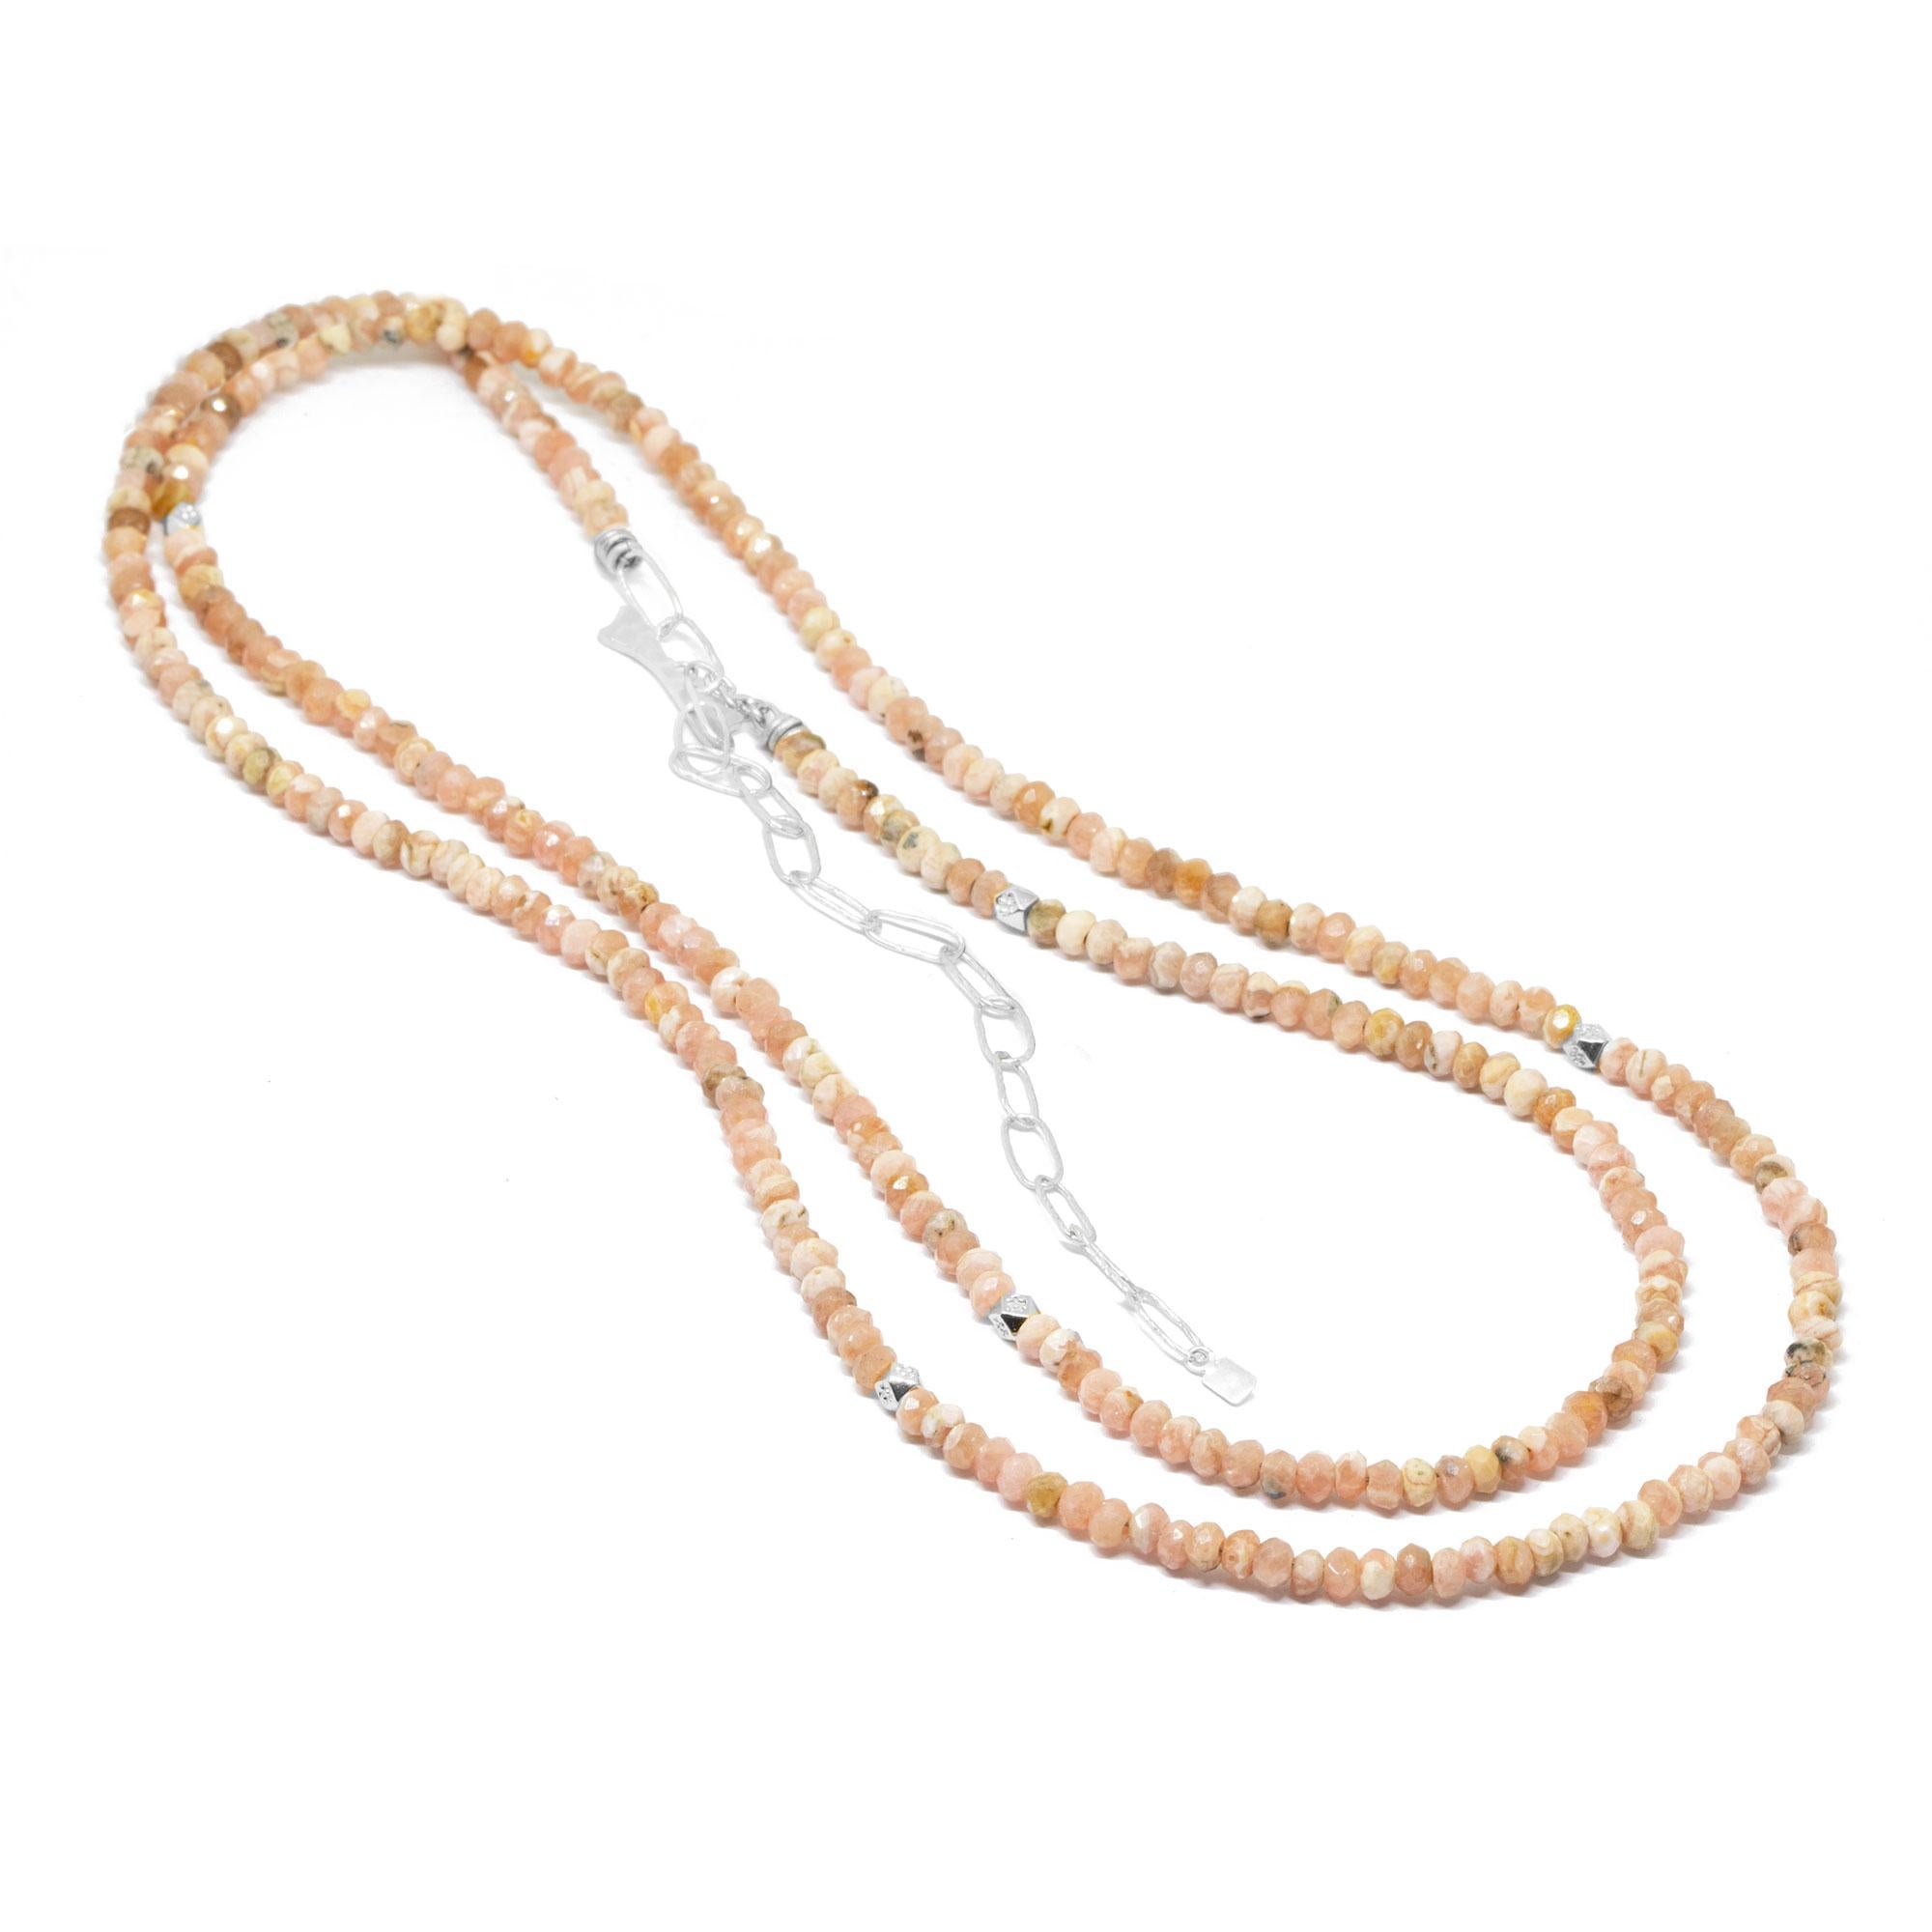 The best part about our Chloe Silver Gemstone Convertable Wrap isn’t just that it can be worn long, doubled-up, or as a wrap bracelet (although that’s pretty cool). It’s that you can thread any of our Charms onto the rhodochrosite beads—have fun